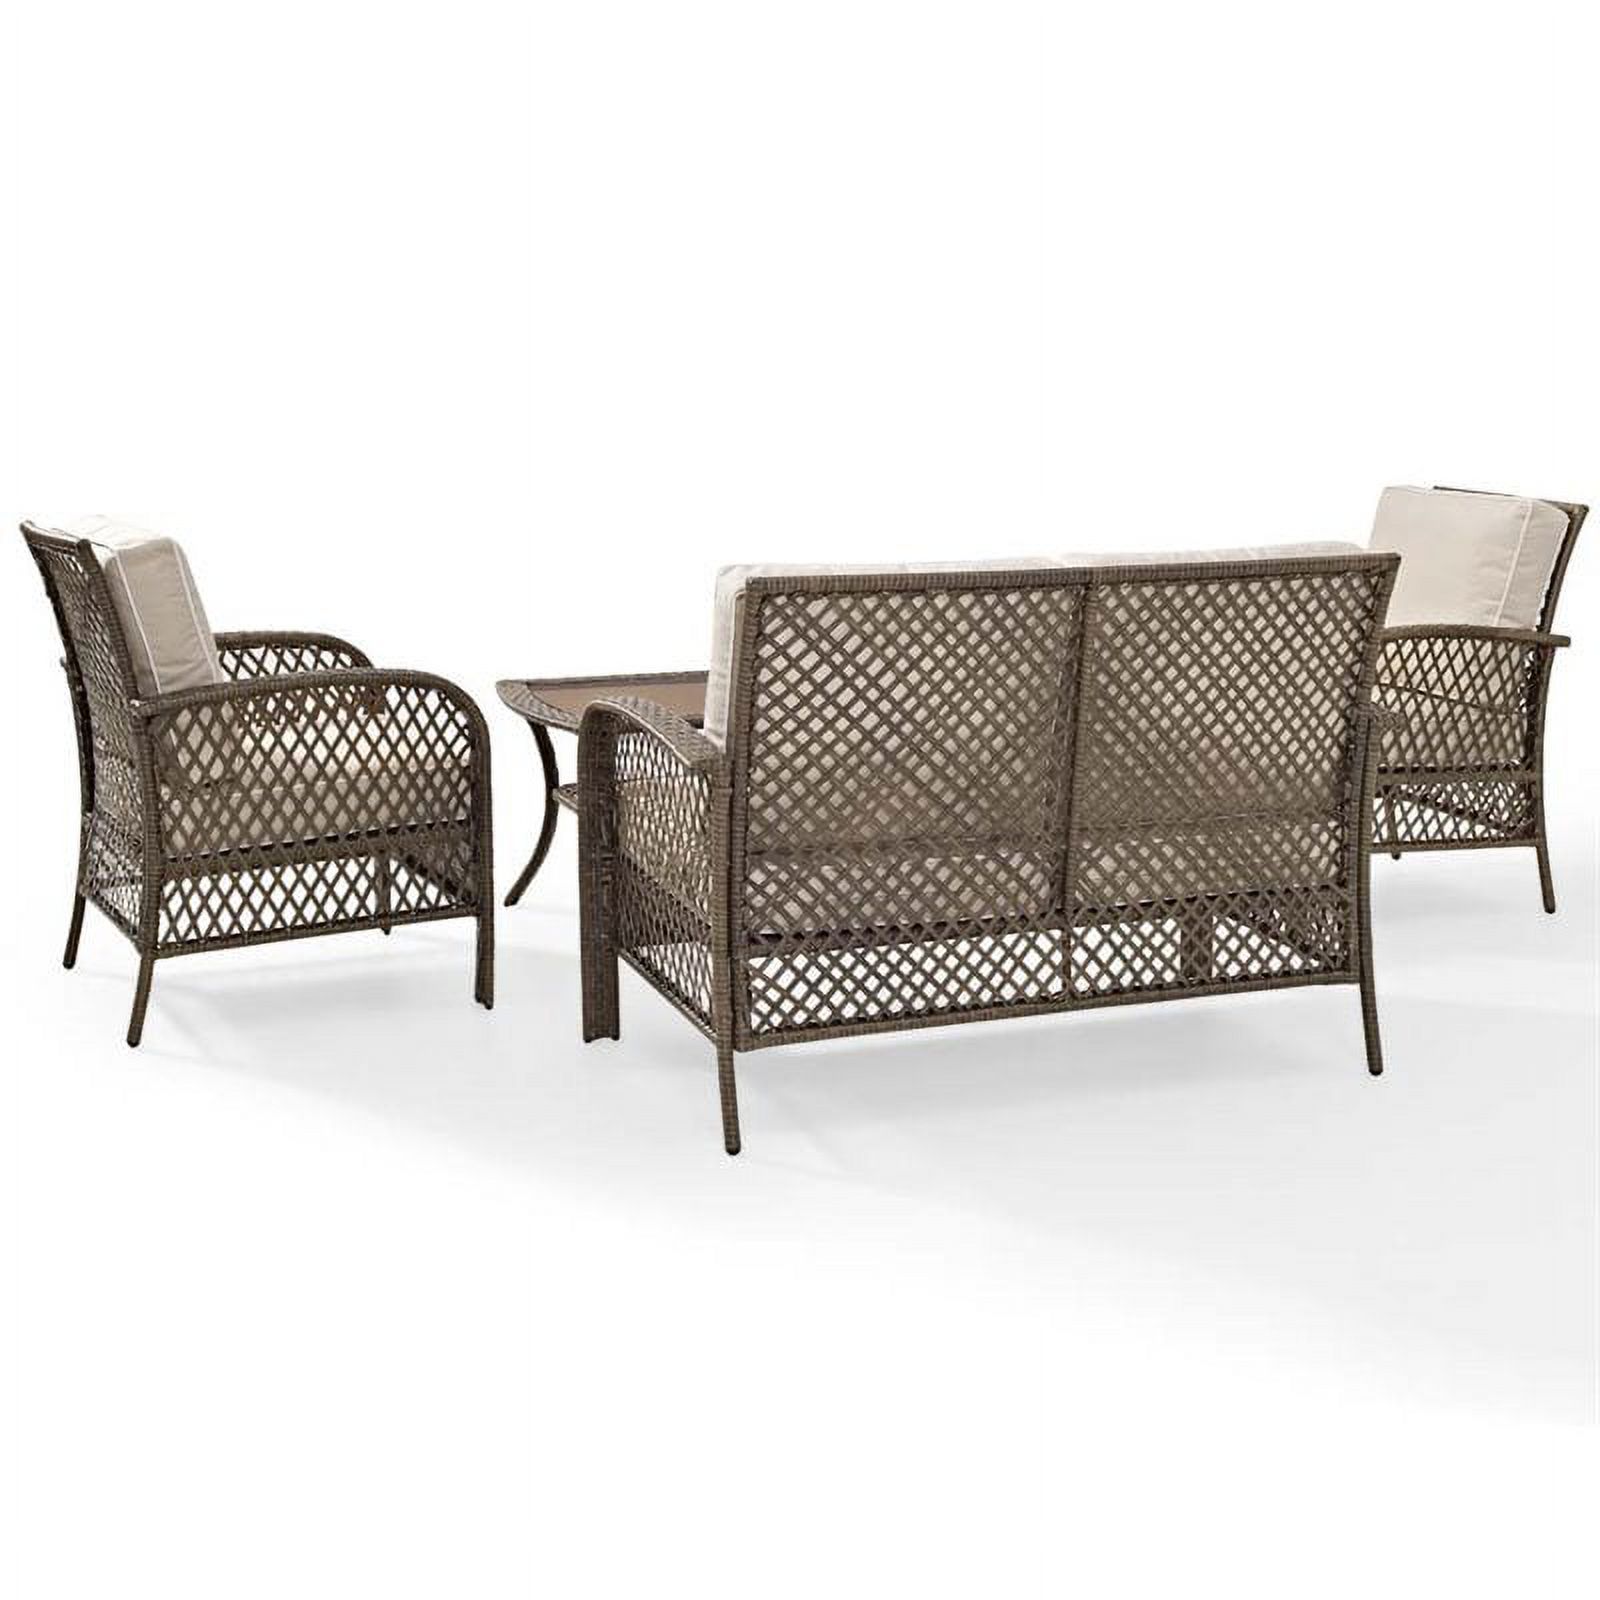 Crosley Furniture Tribeca 4 Piece Outdoor Wicker Seating Set With Sand Cushions - Loveseat, 2 Arm Chairs, And Coffee Table - image 4 of 7